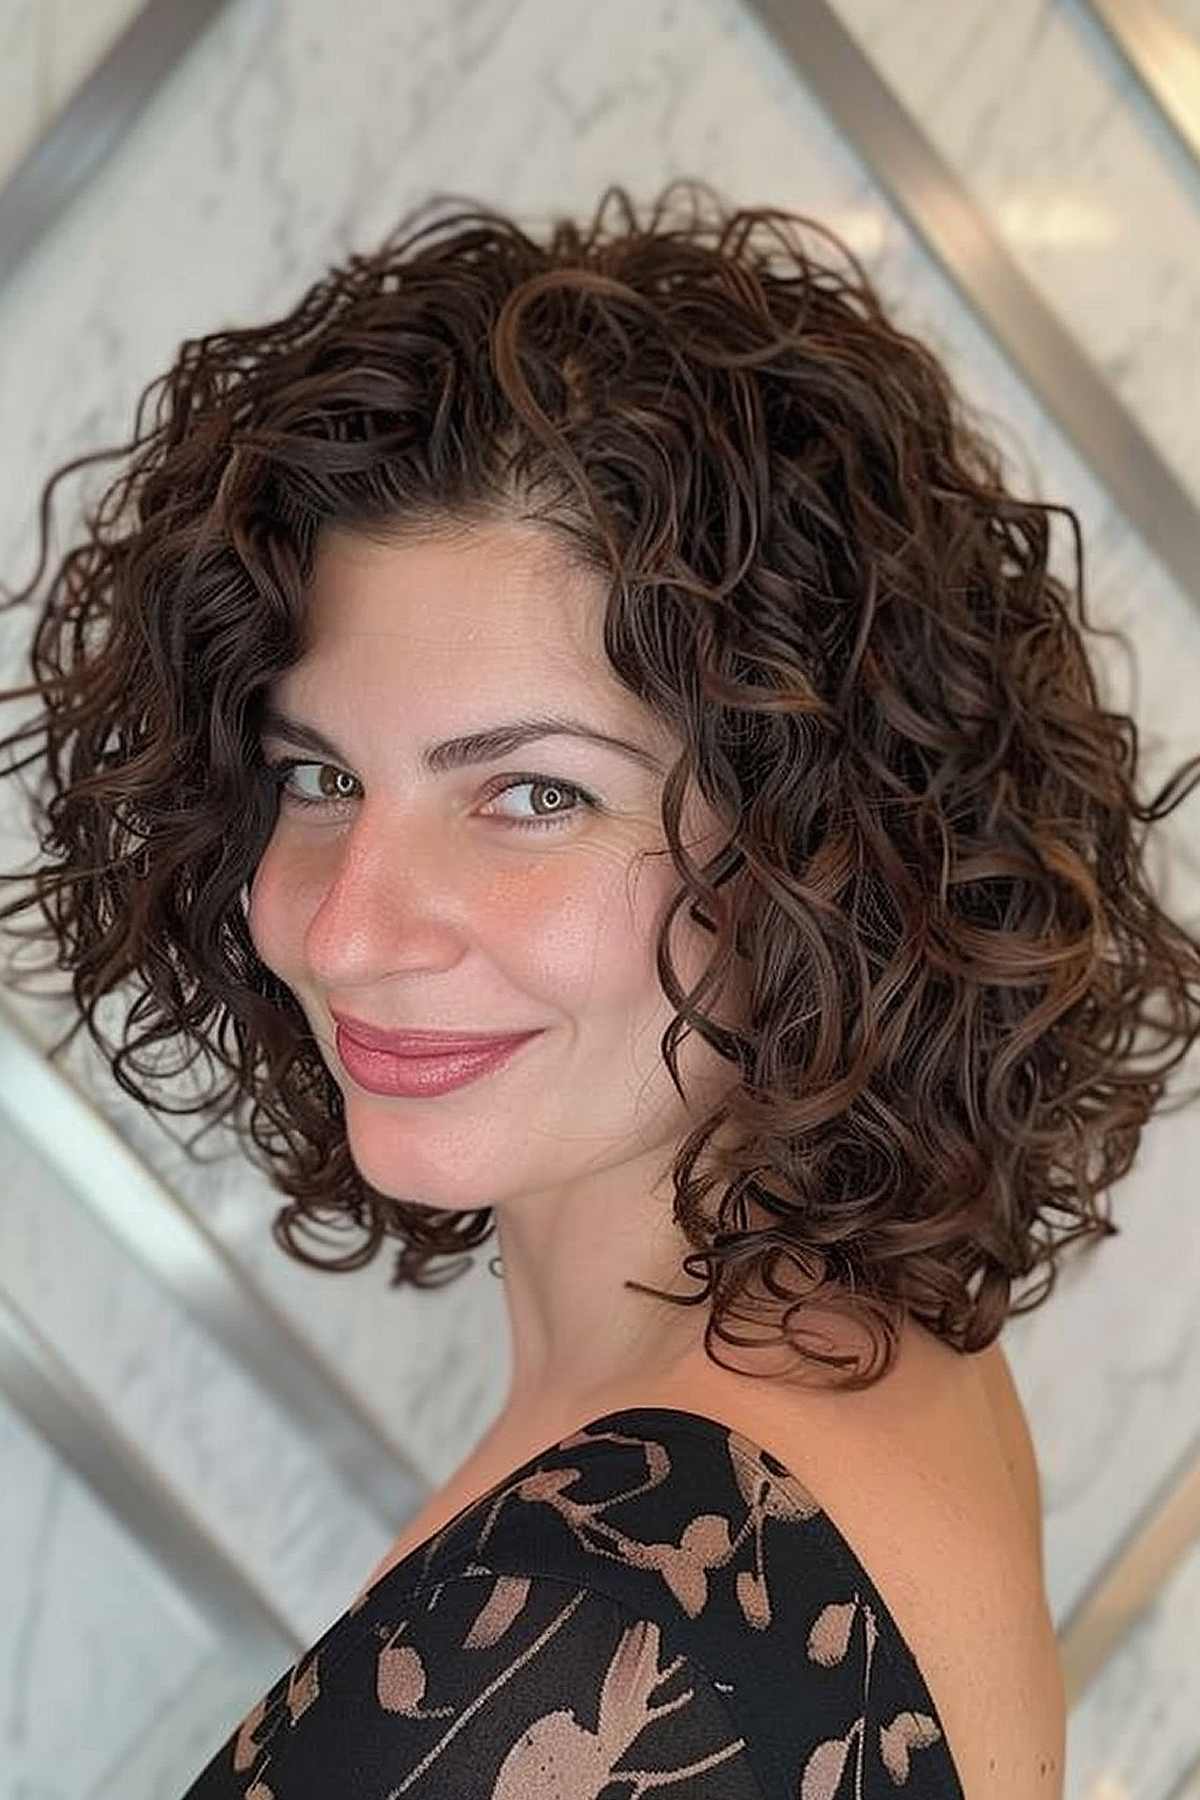 Face-framing A-line curly lob hairstyle with natural curls